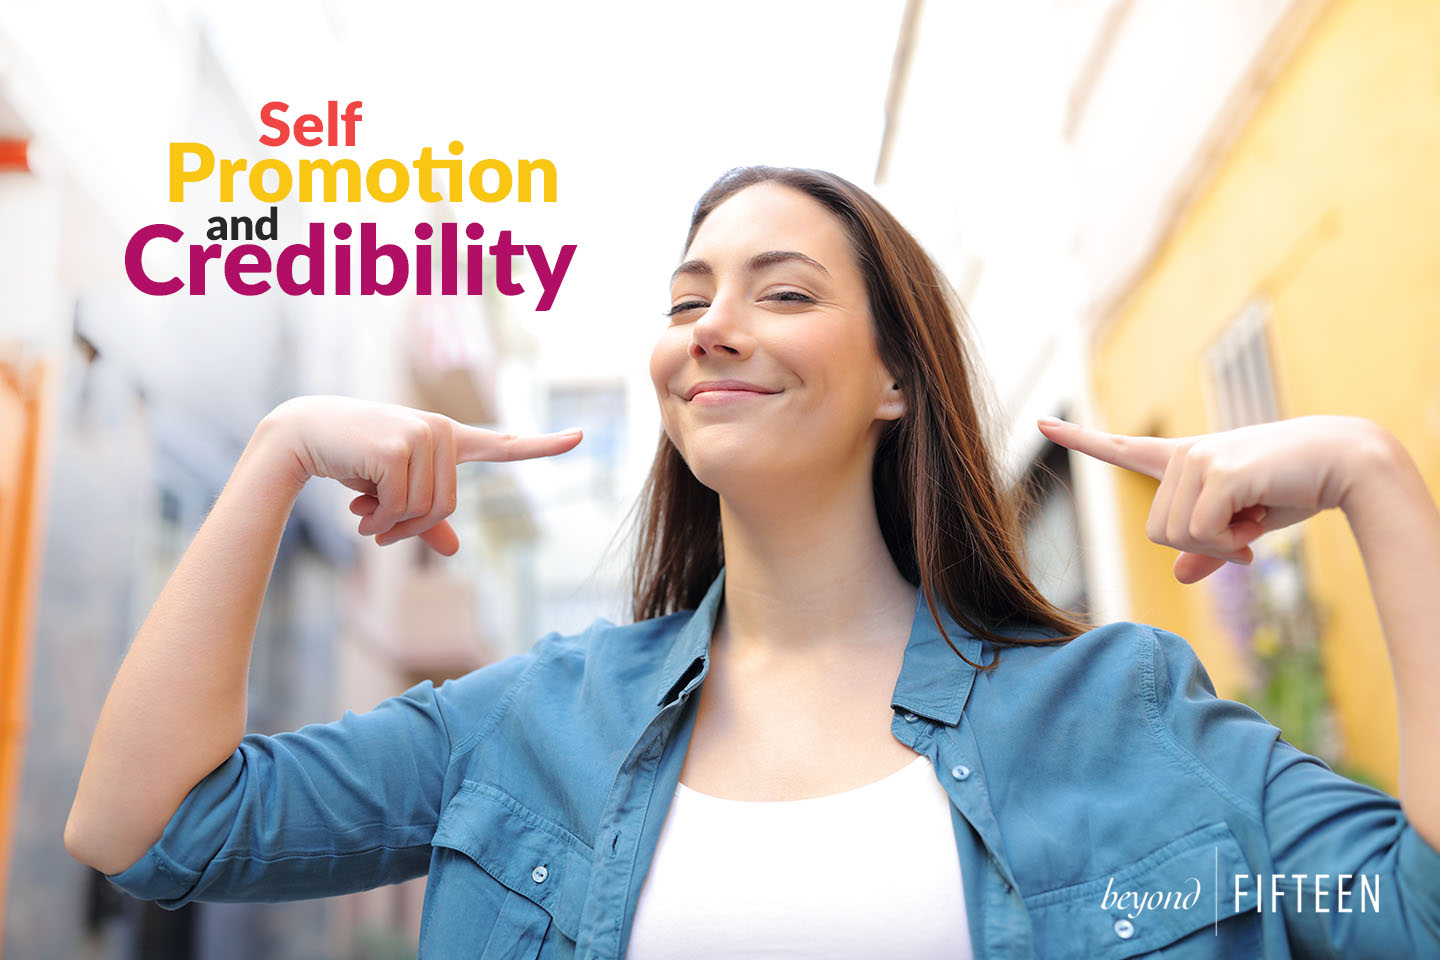 Self-Promotion and Credibility